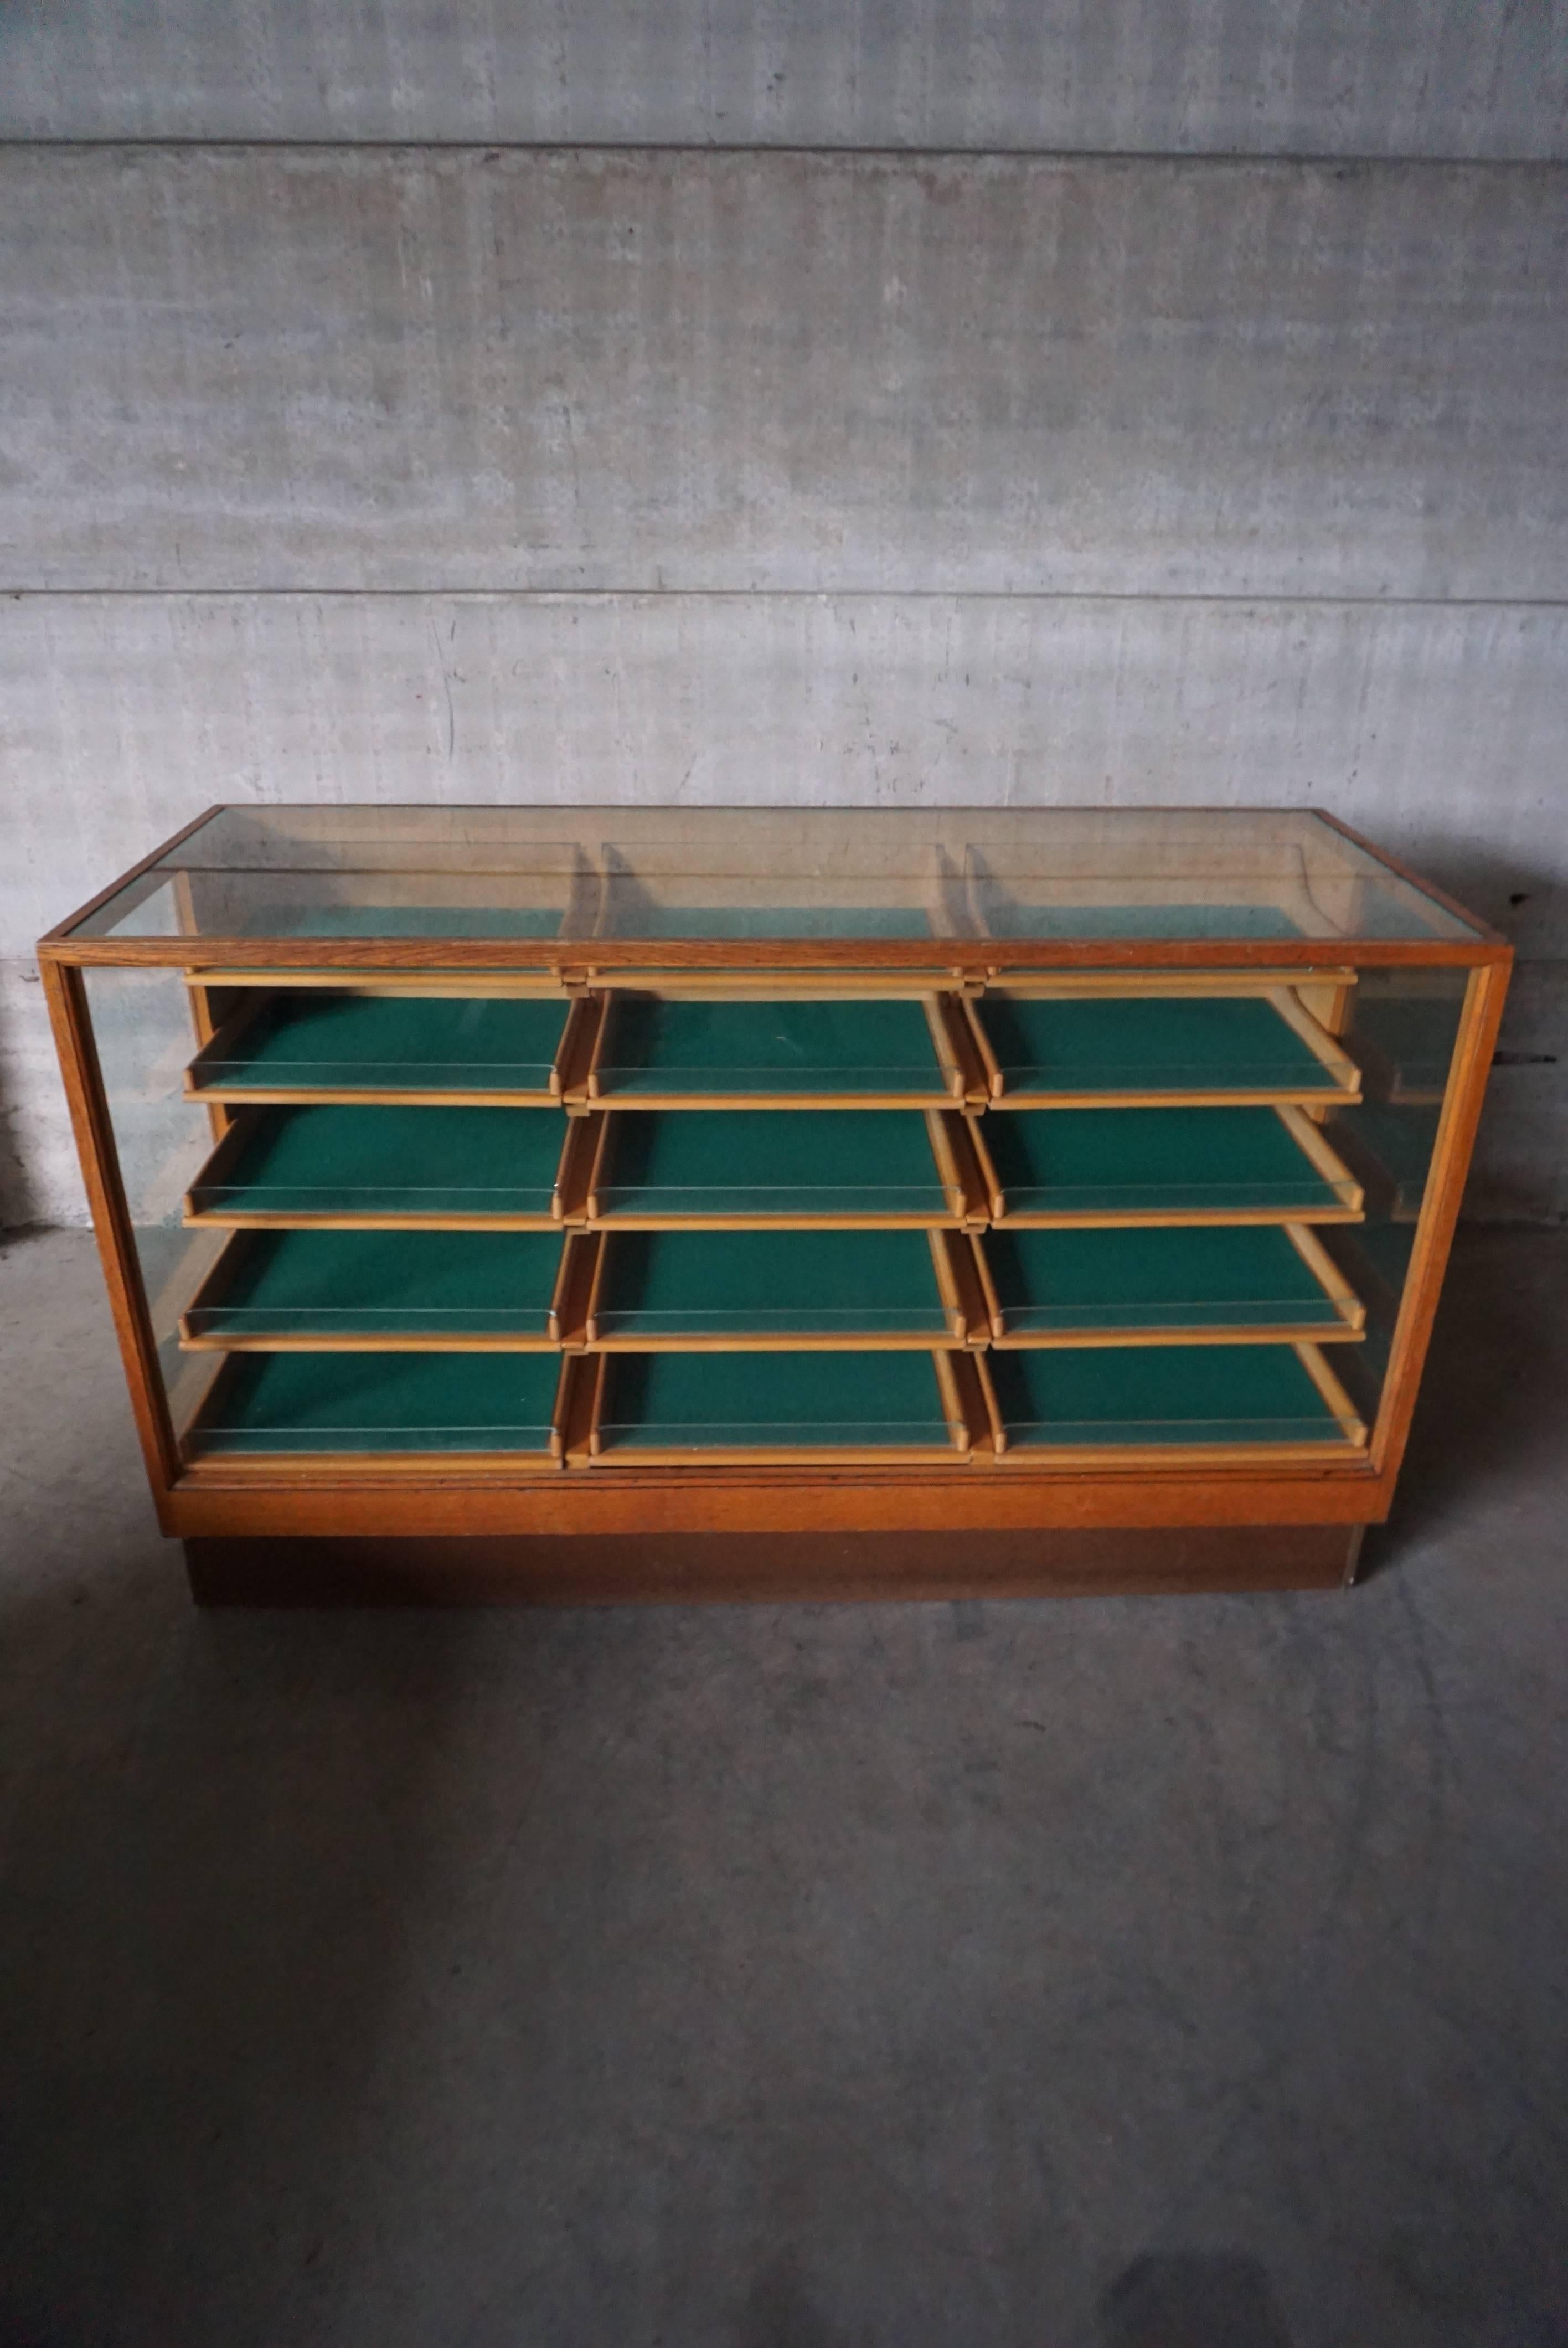 This small shop counter was made and manufactured during the 1950s. It features an Oak frame with pine wood drawers with wooden handles and a glass casing. It remains in a good vintage condition with some marks consistent with age and use.